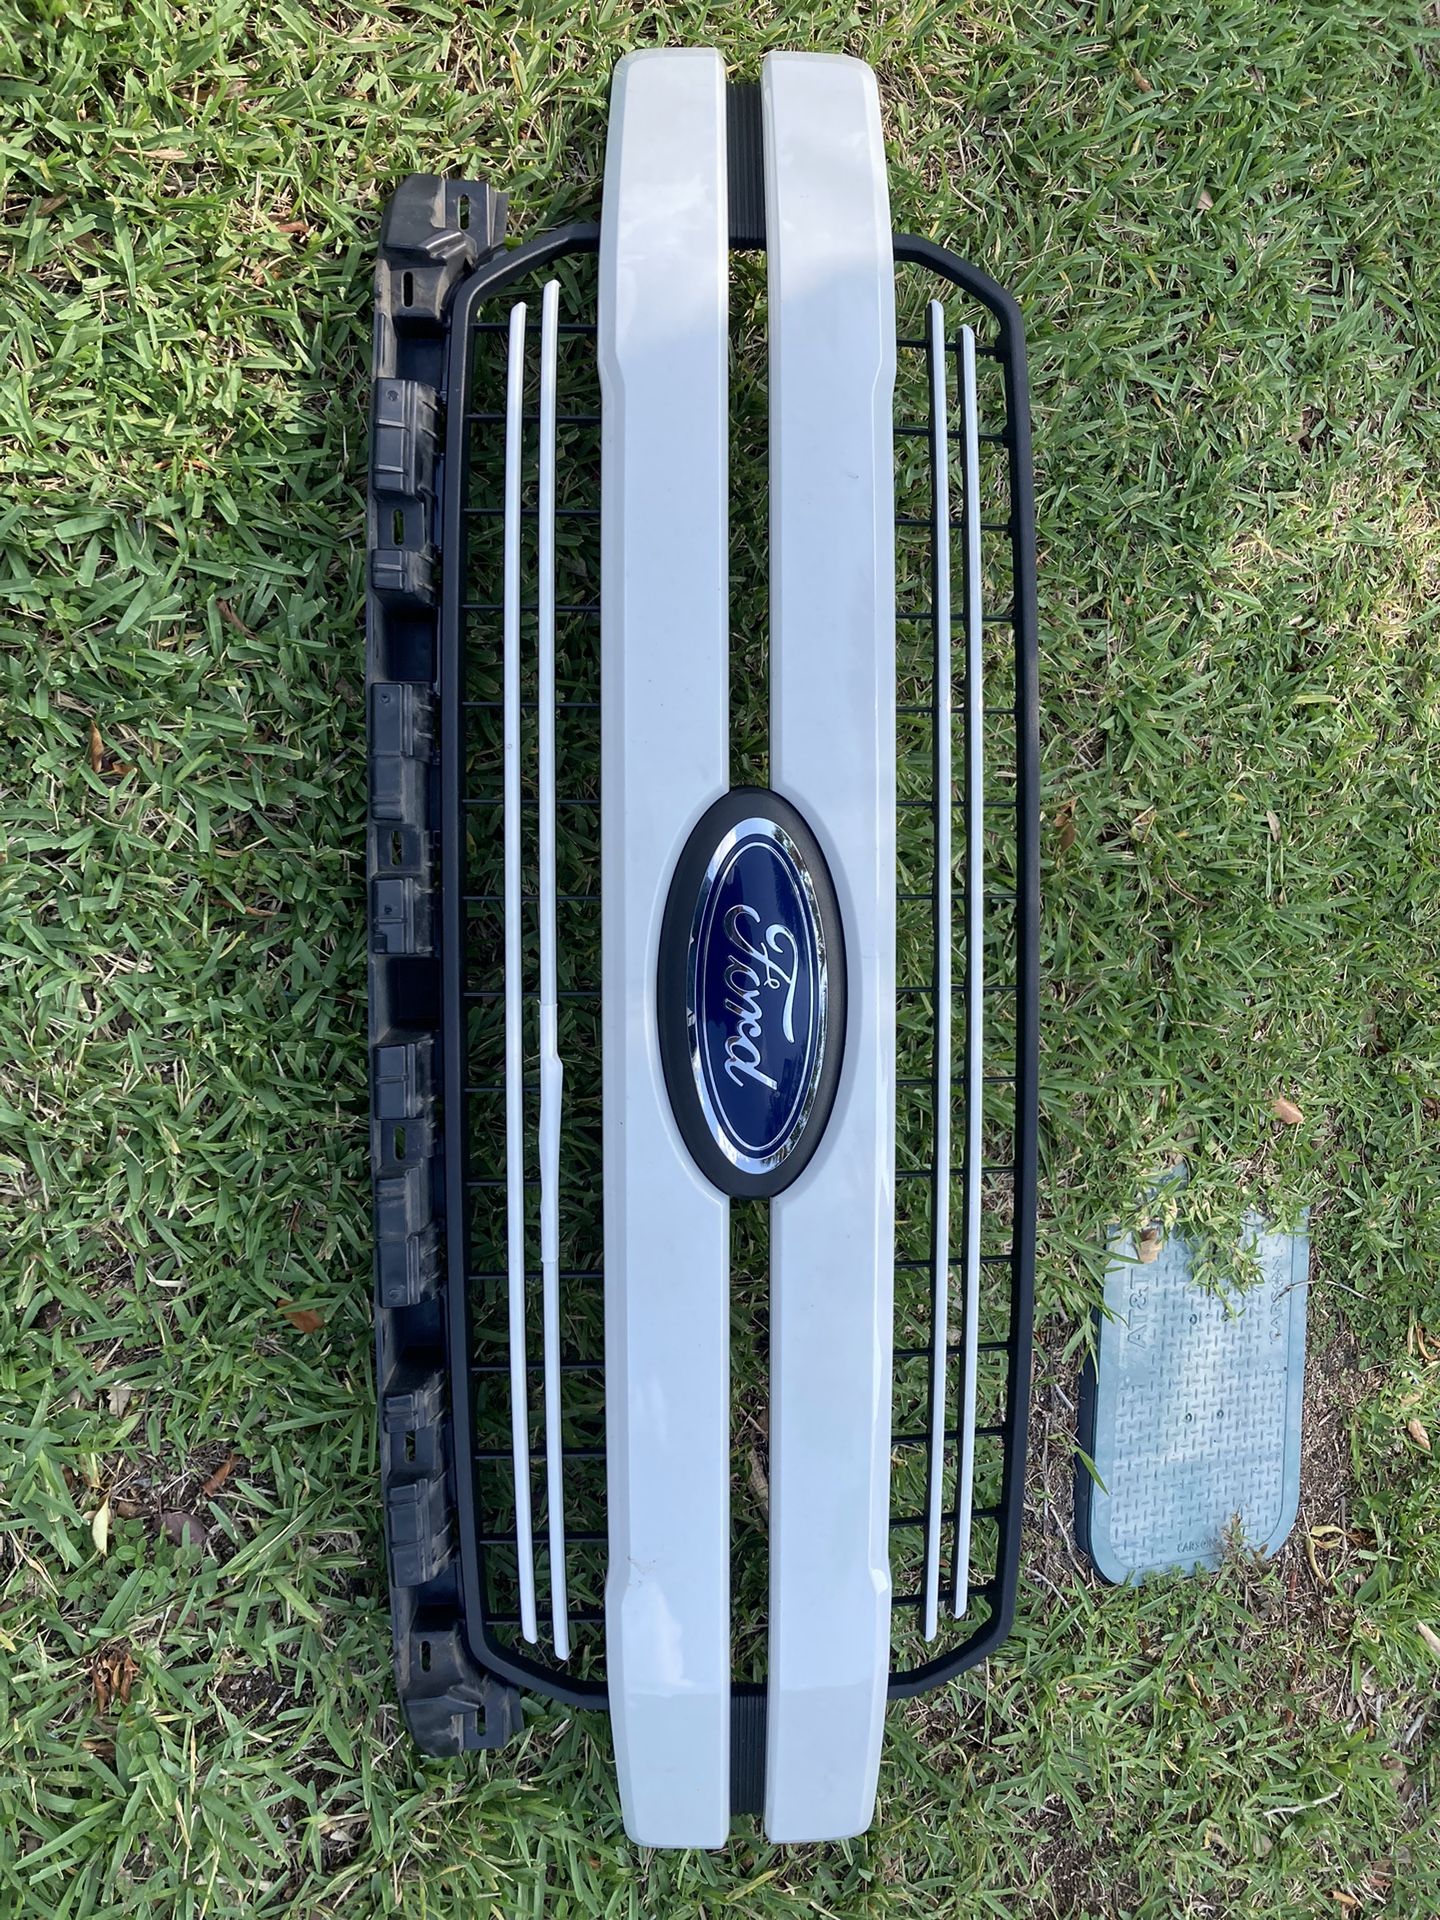 2018 F150 Lariat Grille Oxford White YZ